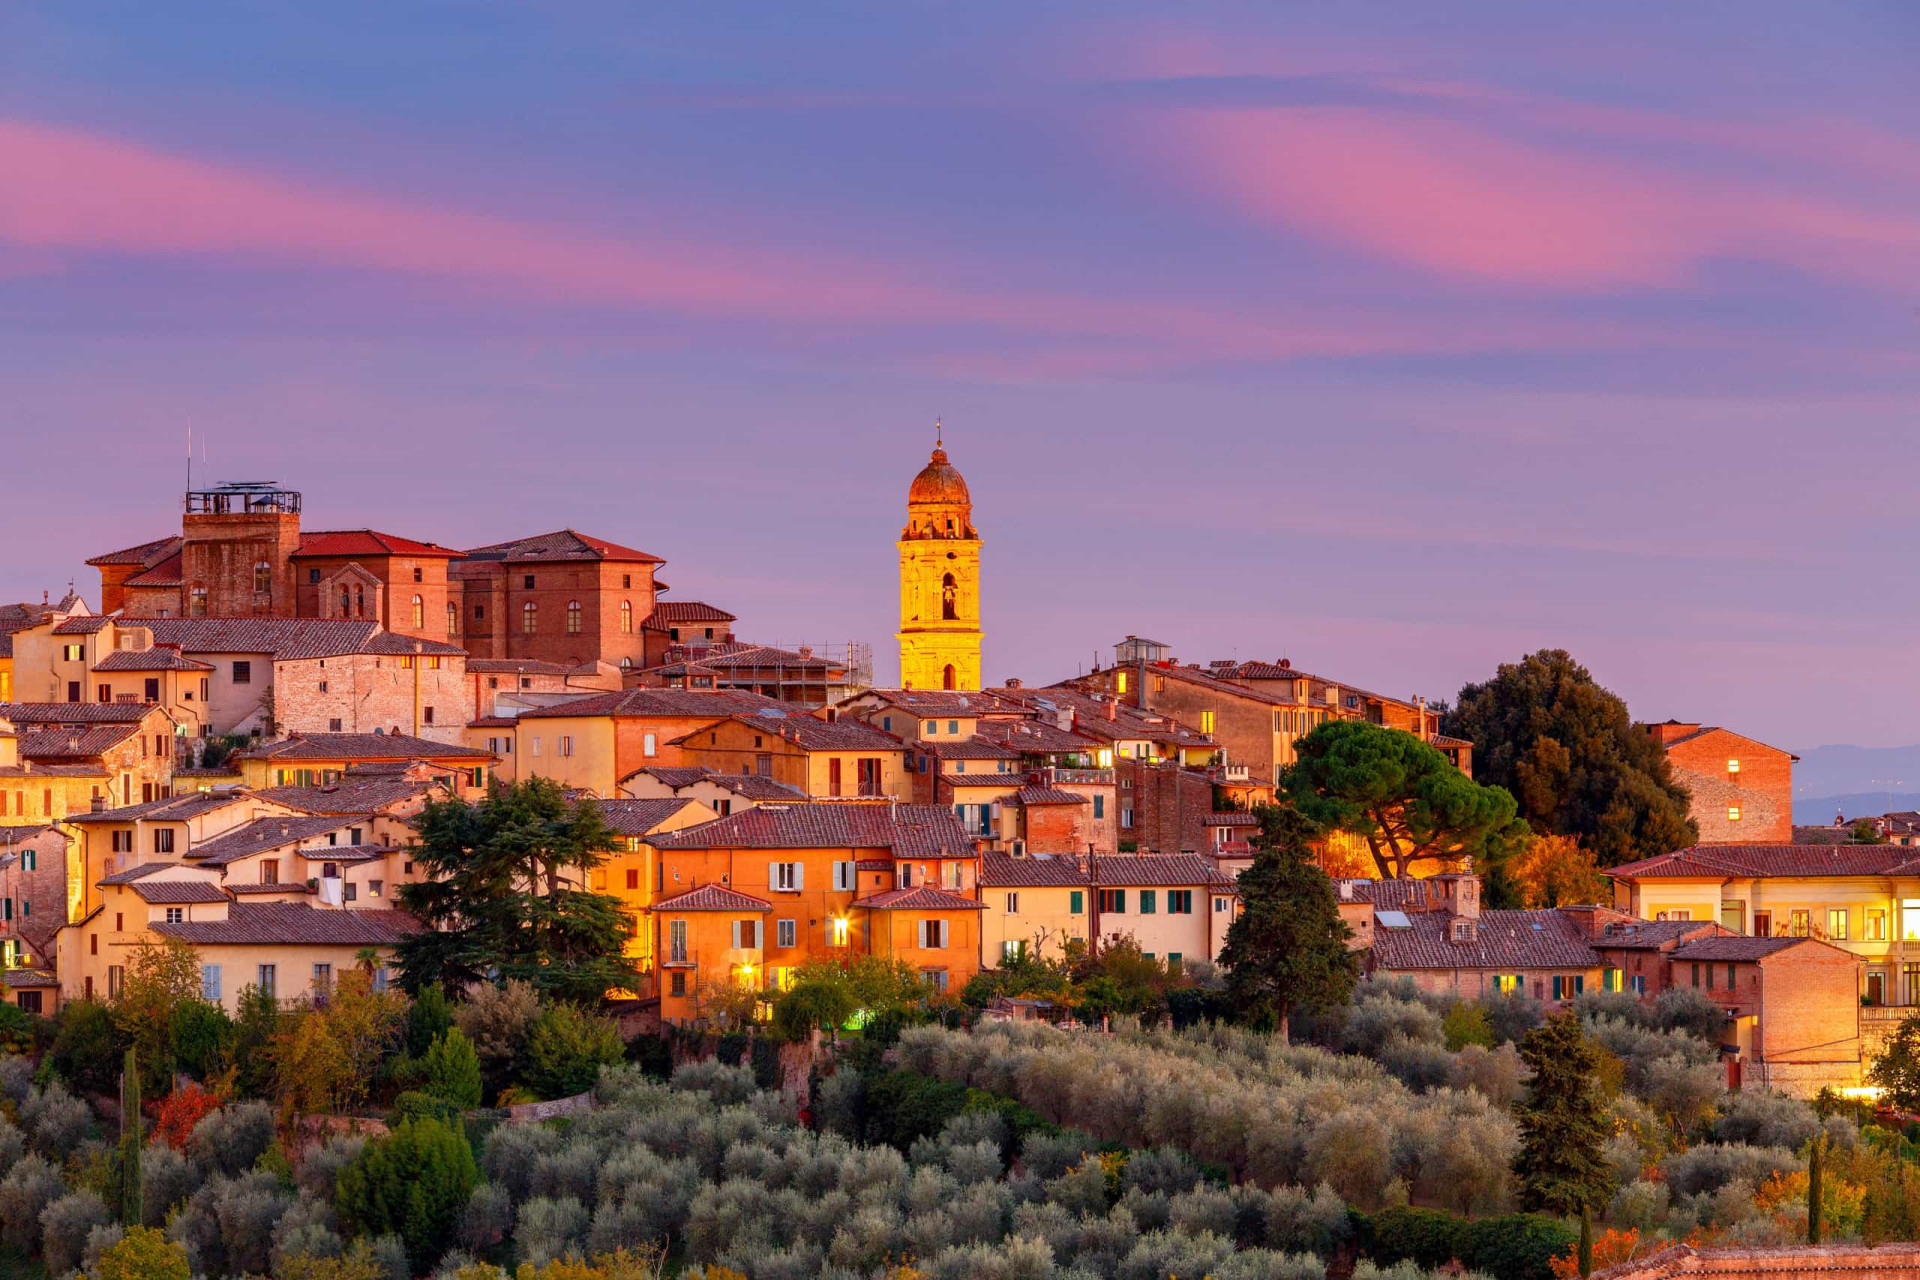 <p>Another astonishingly beautiful Tuscan town, medieval Sienna is an architectural time warp of historic buildings set around a central square.</p>